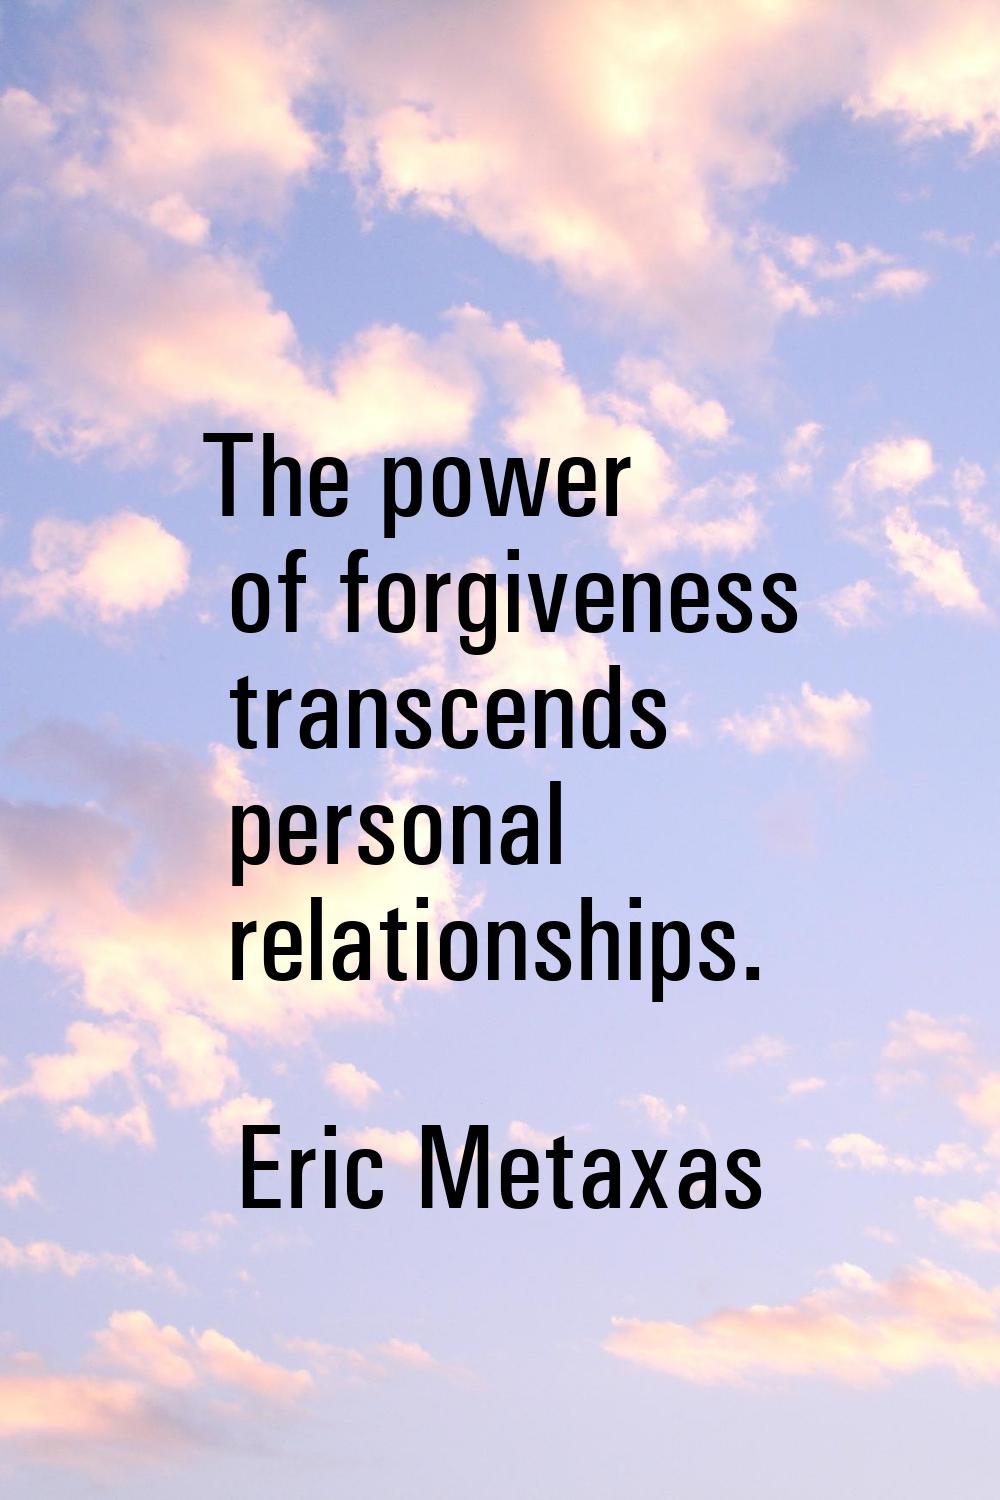 The power of forgiveness transcends personal relationships.